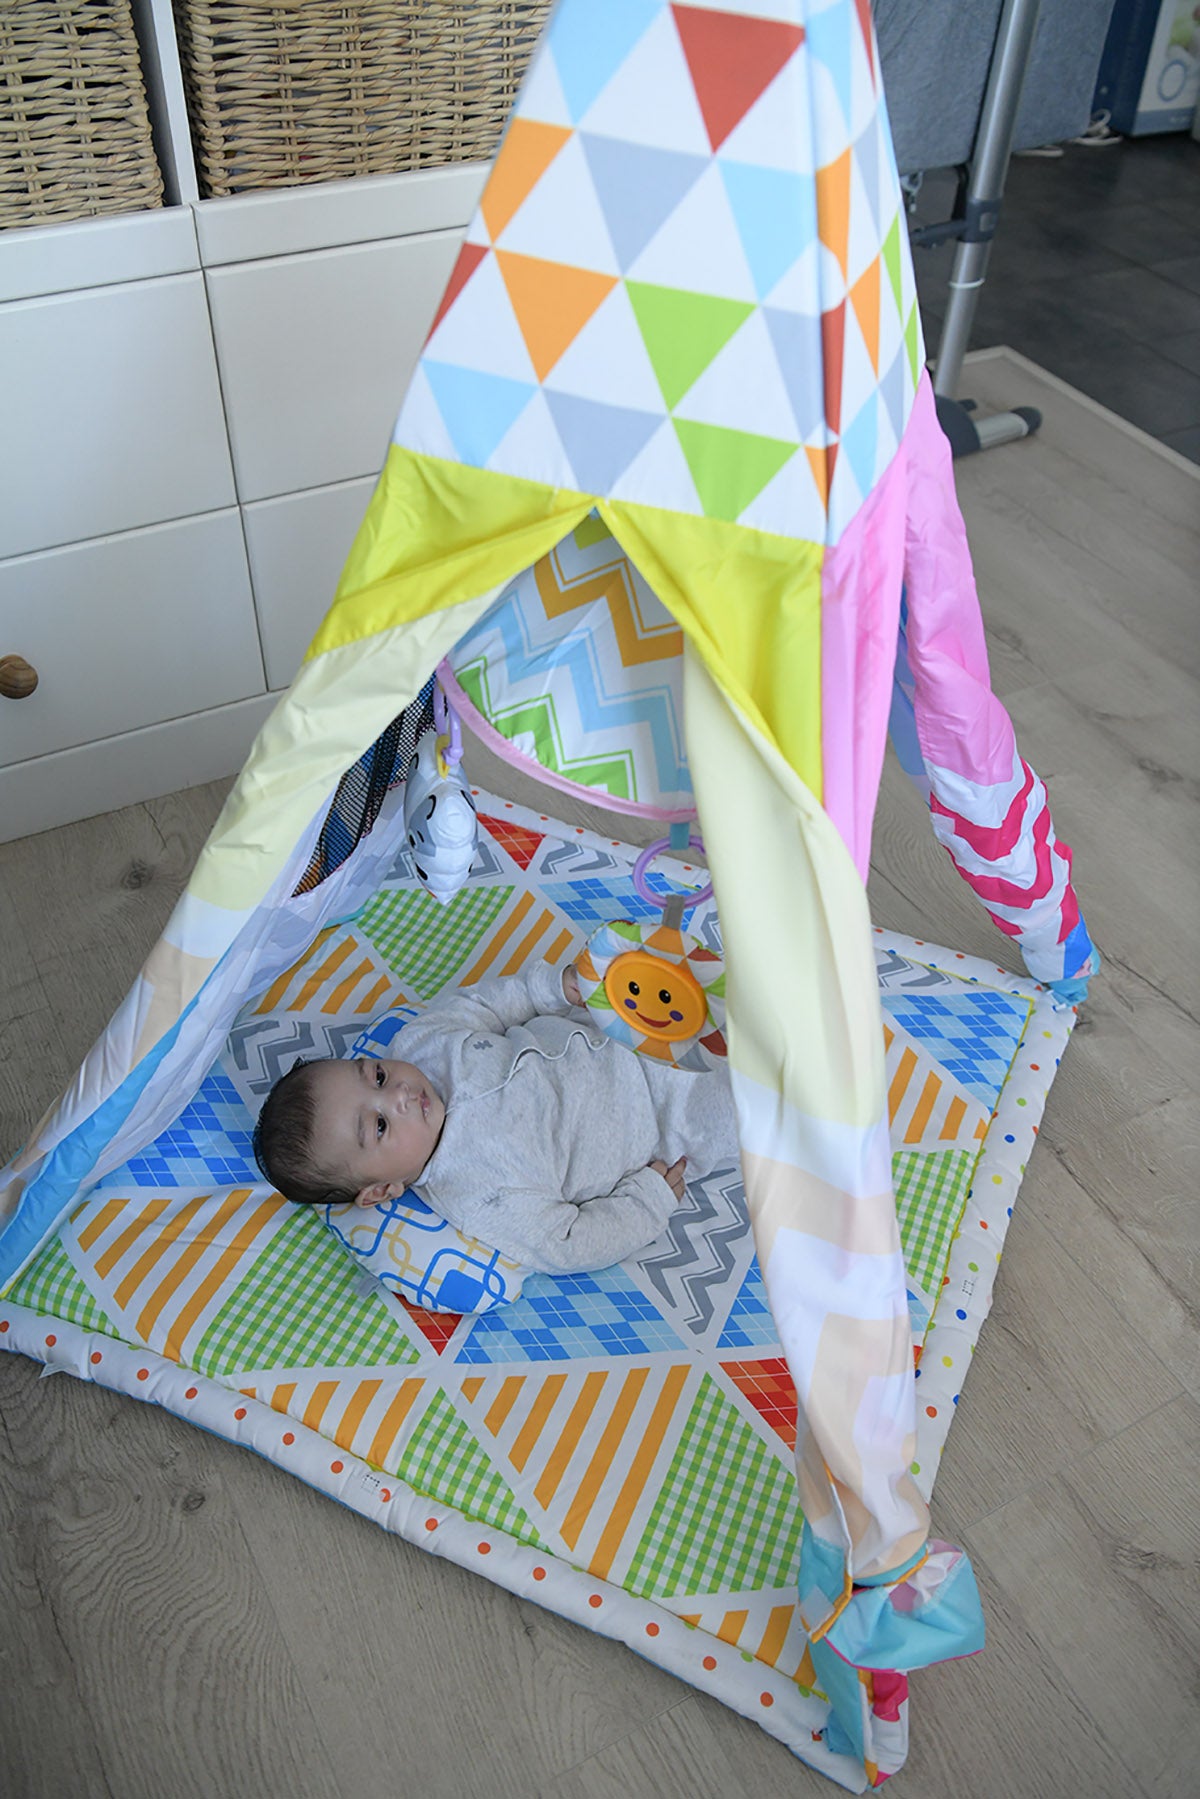 Snuggletime Grow-with-Me Teepee Activity Play Tent